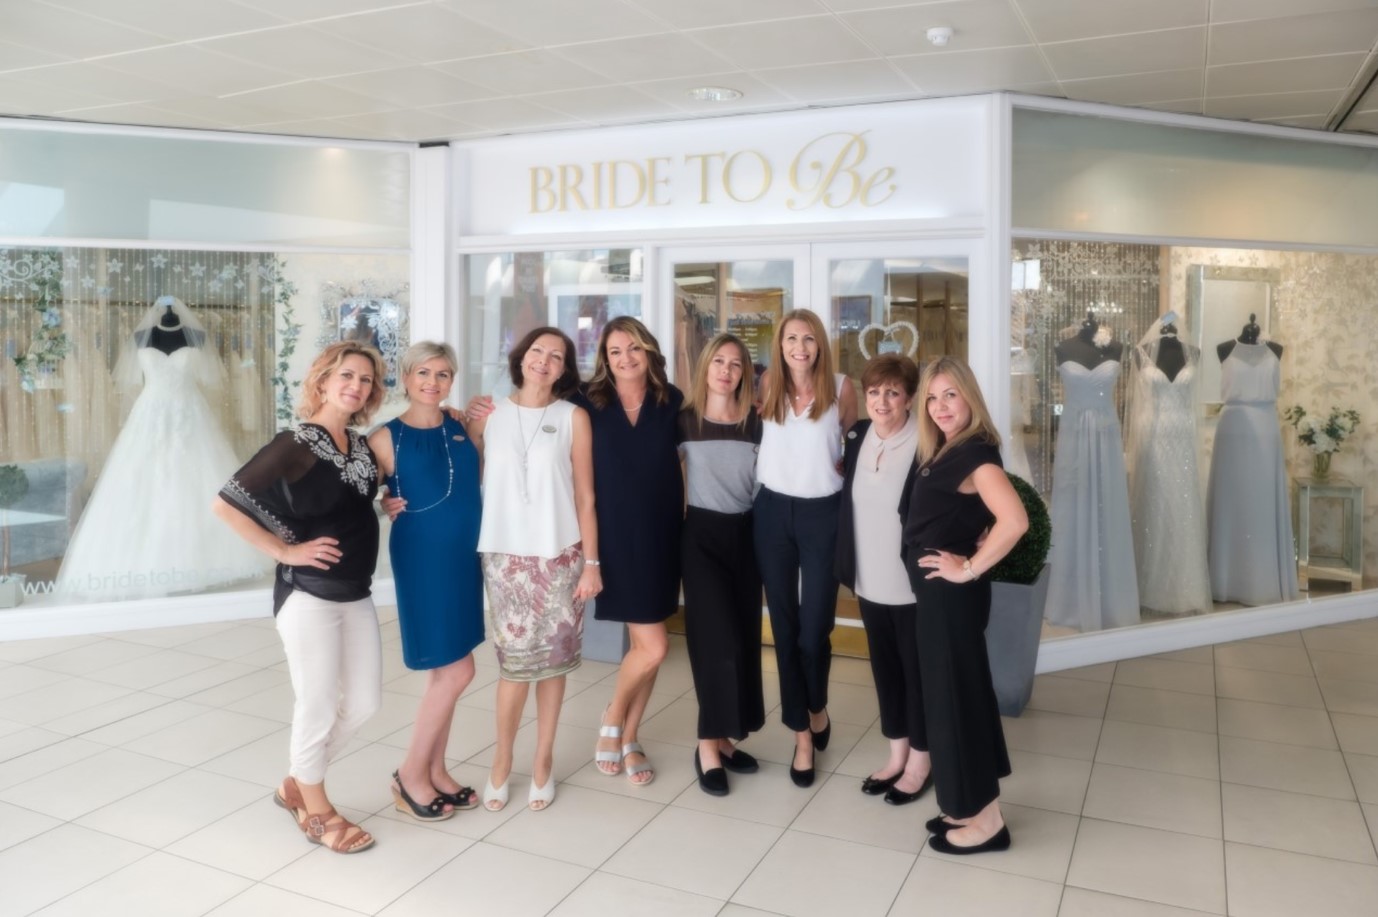 The Bride to Be team